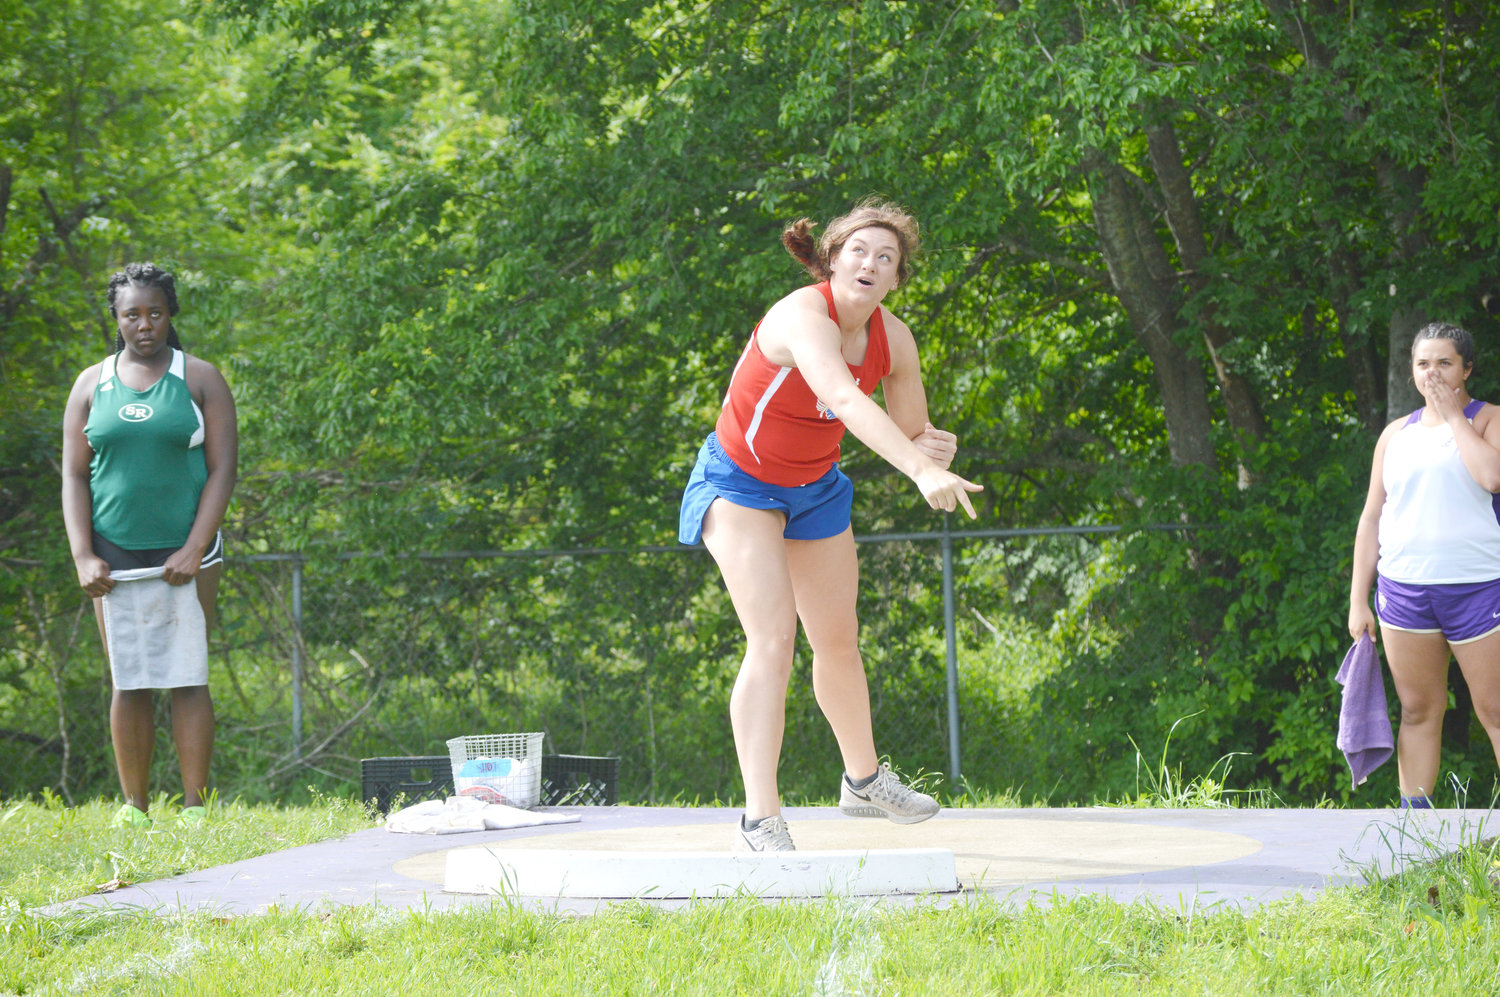 Alba-Golden’s Shelby Wright came in first place in shot-put competition at last week’s area track meet with a throw of 38-1. Wright will now advance to the region meet at Whitehouse this Friday and Saturday.